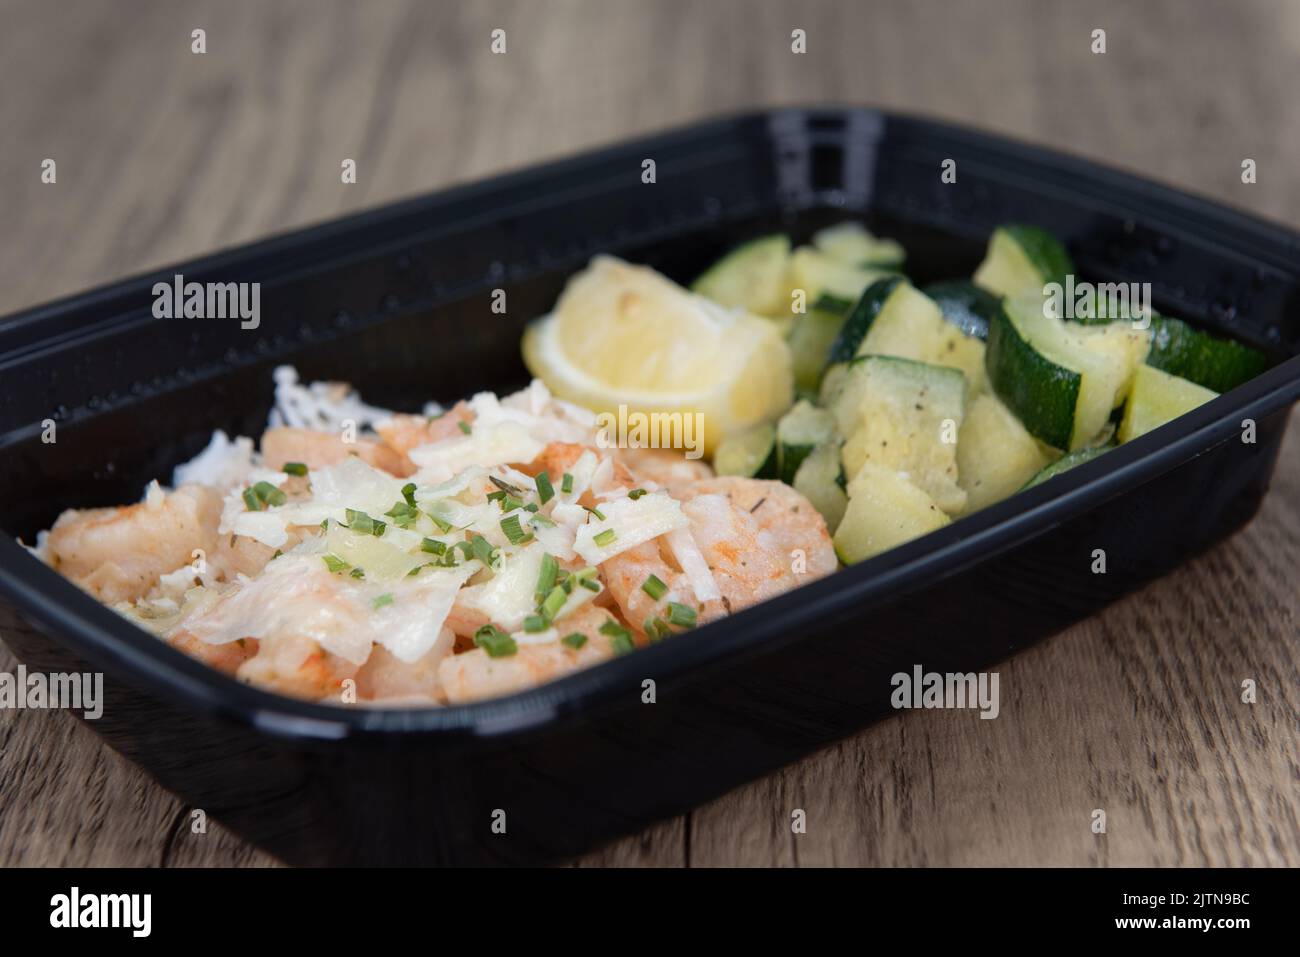 Overhead view of take out order of shrimp with Jasmin rice and chopped vegetables is conveniently packed in a microwavable container. Stock Photo